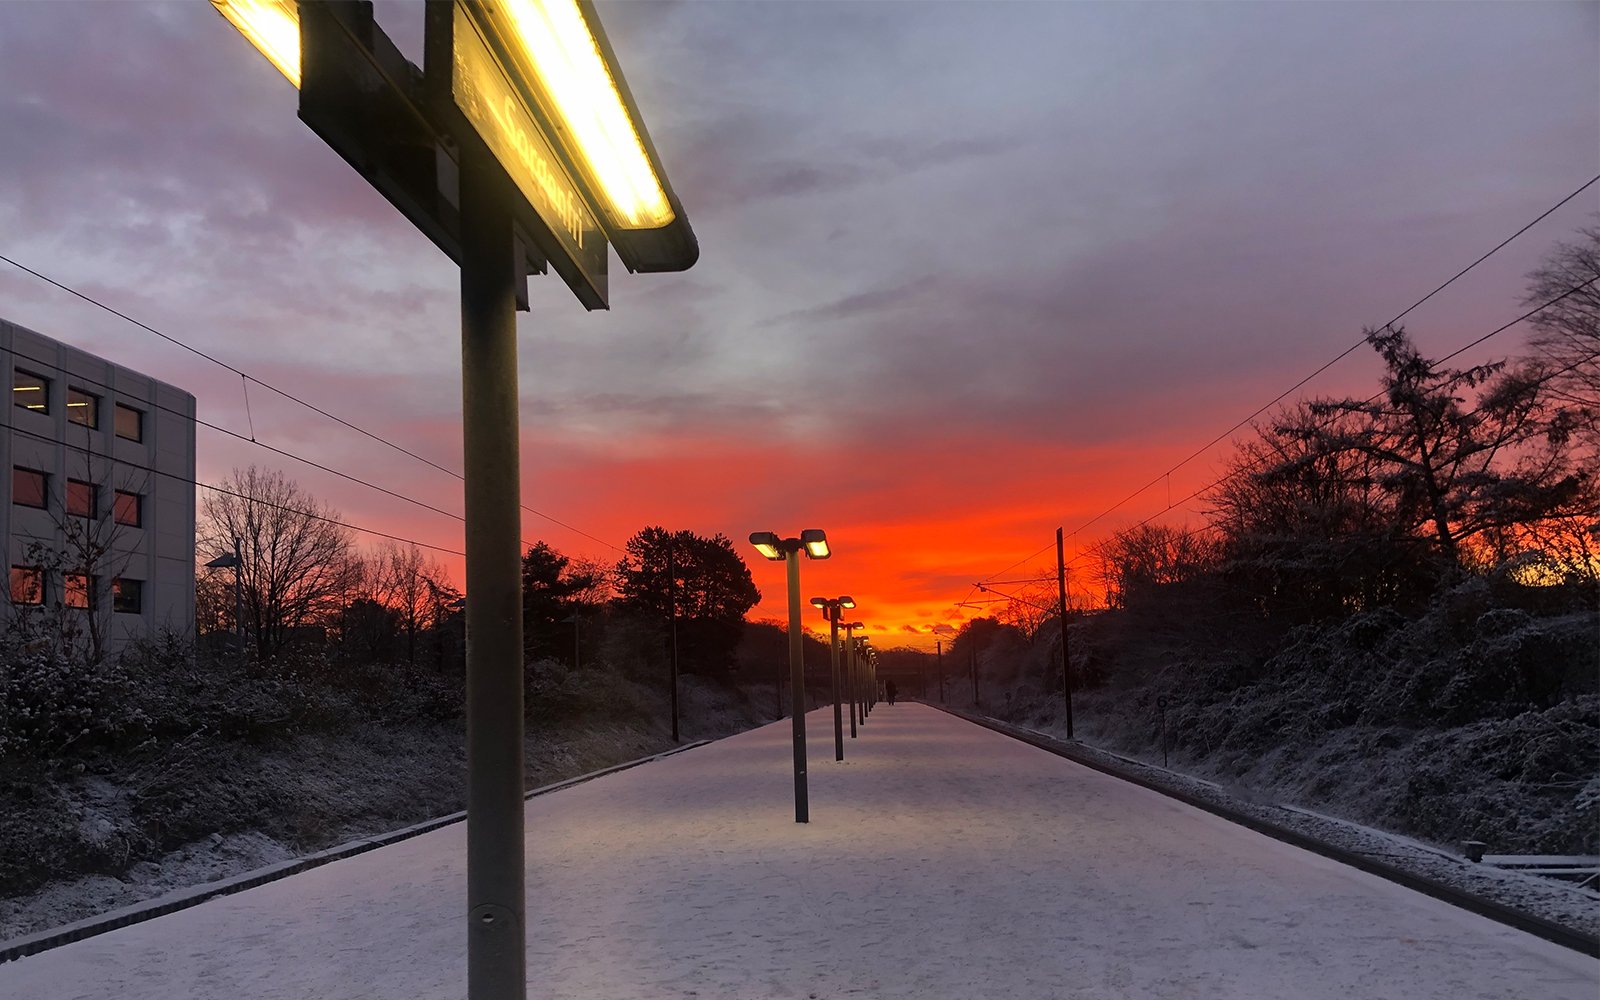 Snowy path lined by streetlights leading toward red-tinged sky